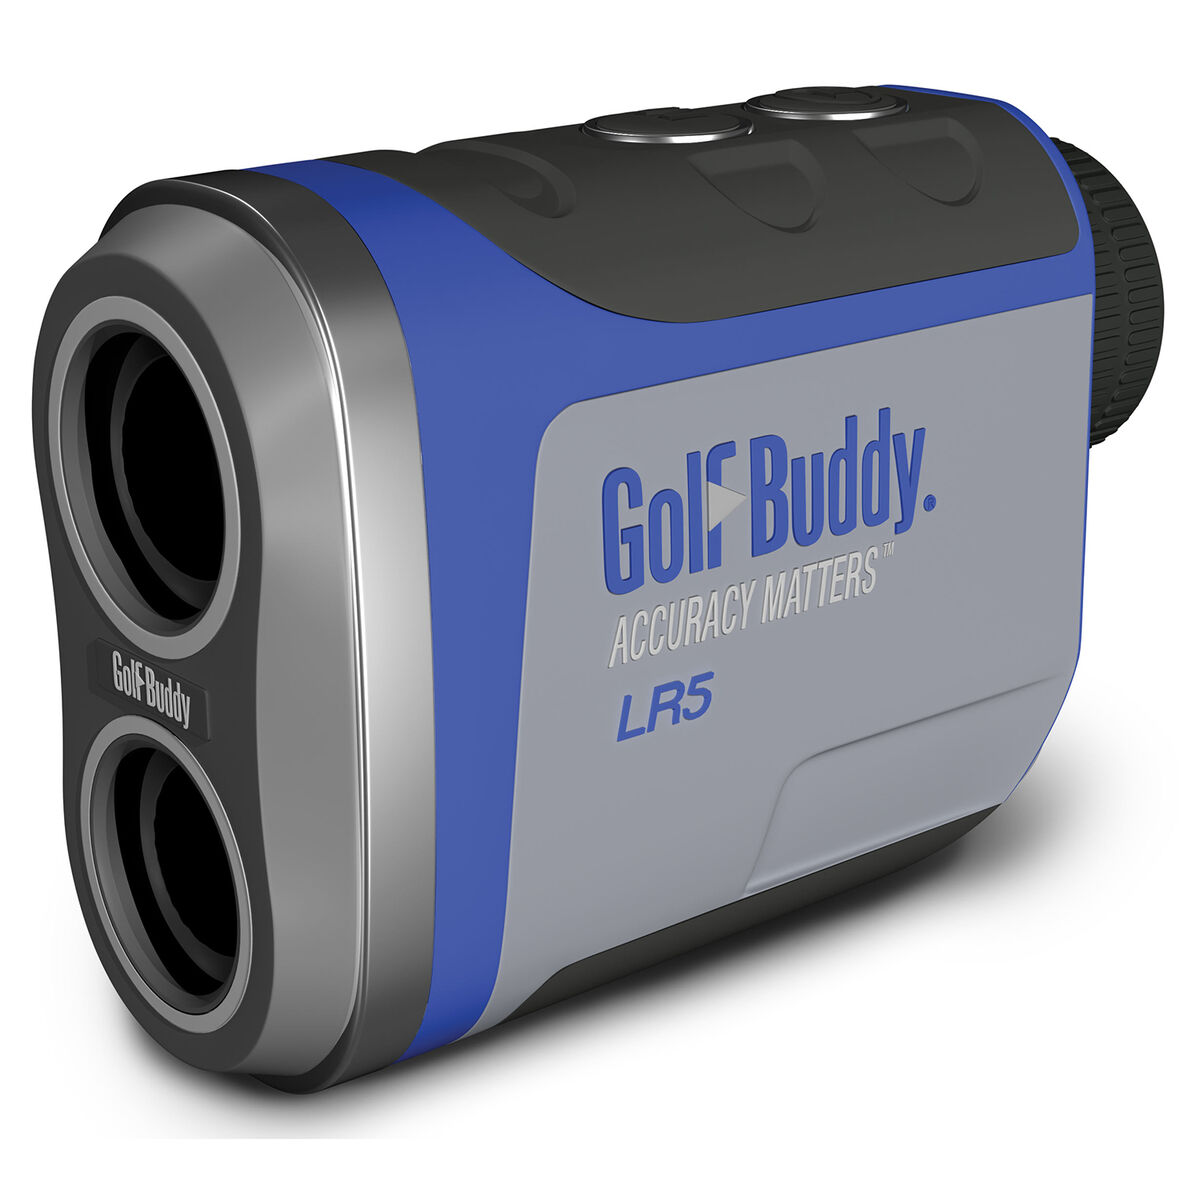 does pga tour allow rangefinders